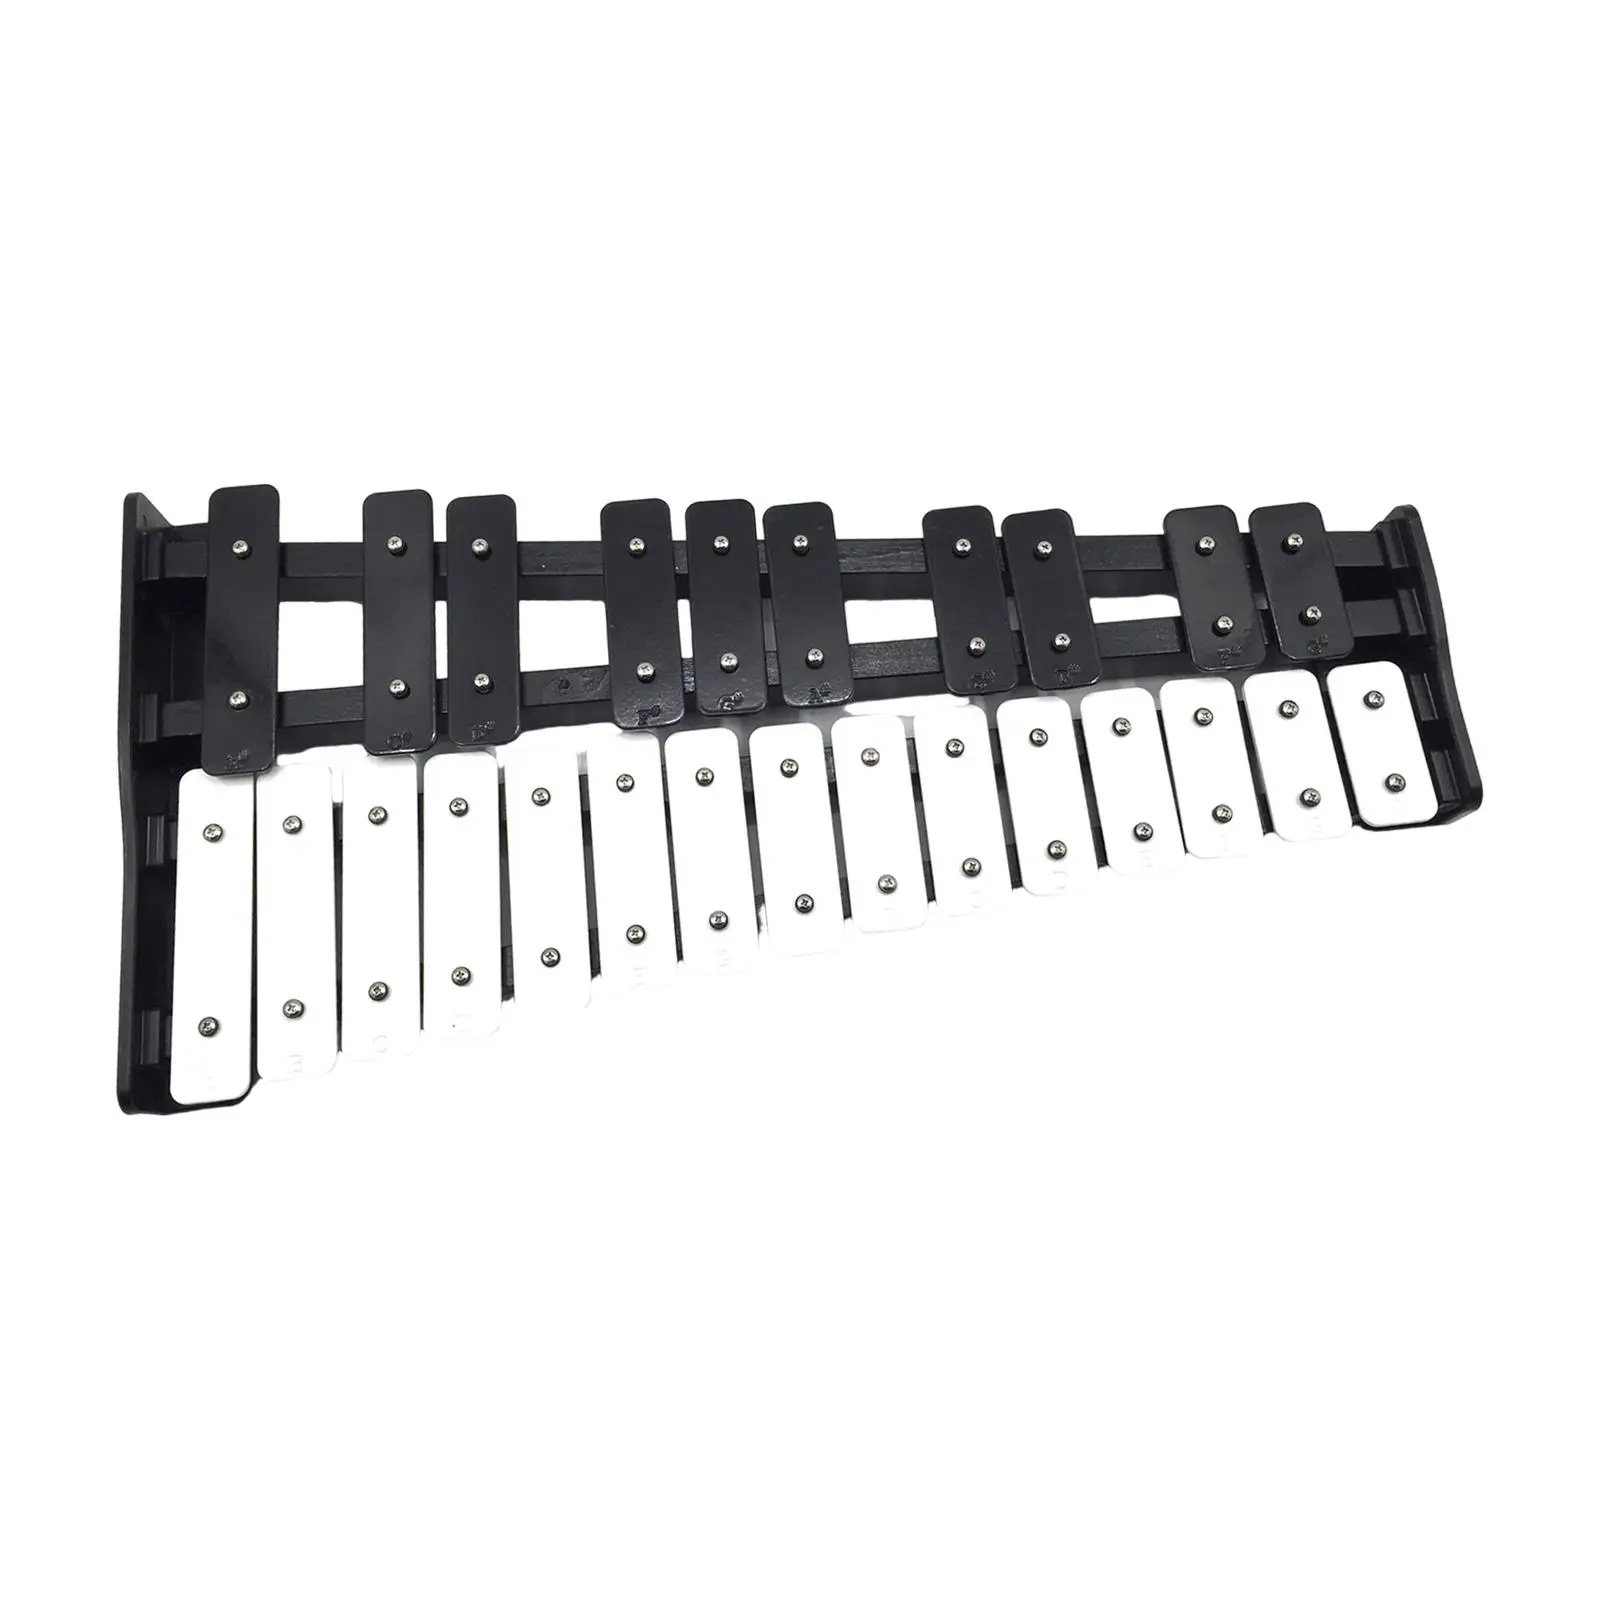 25 Note Glockenspiel Compact Gifts Portable for Beginners Xylophone Musical Educational Tuned Glockenspiel Musical Instrument